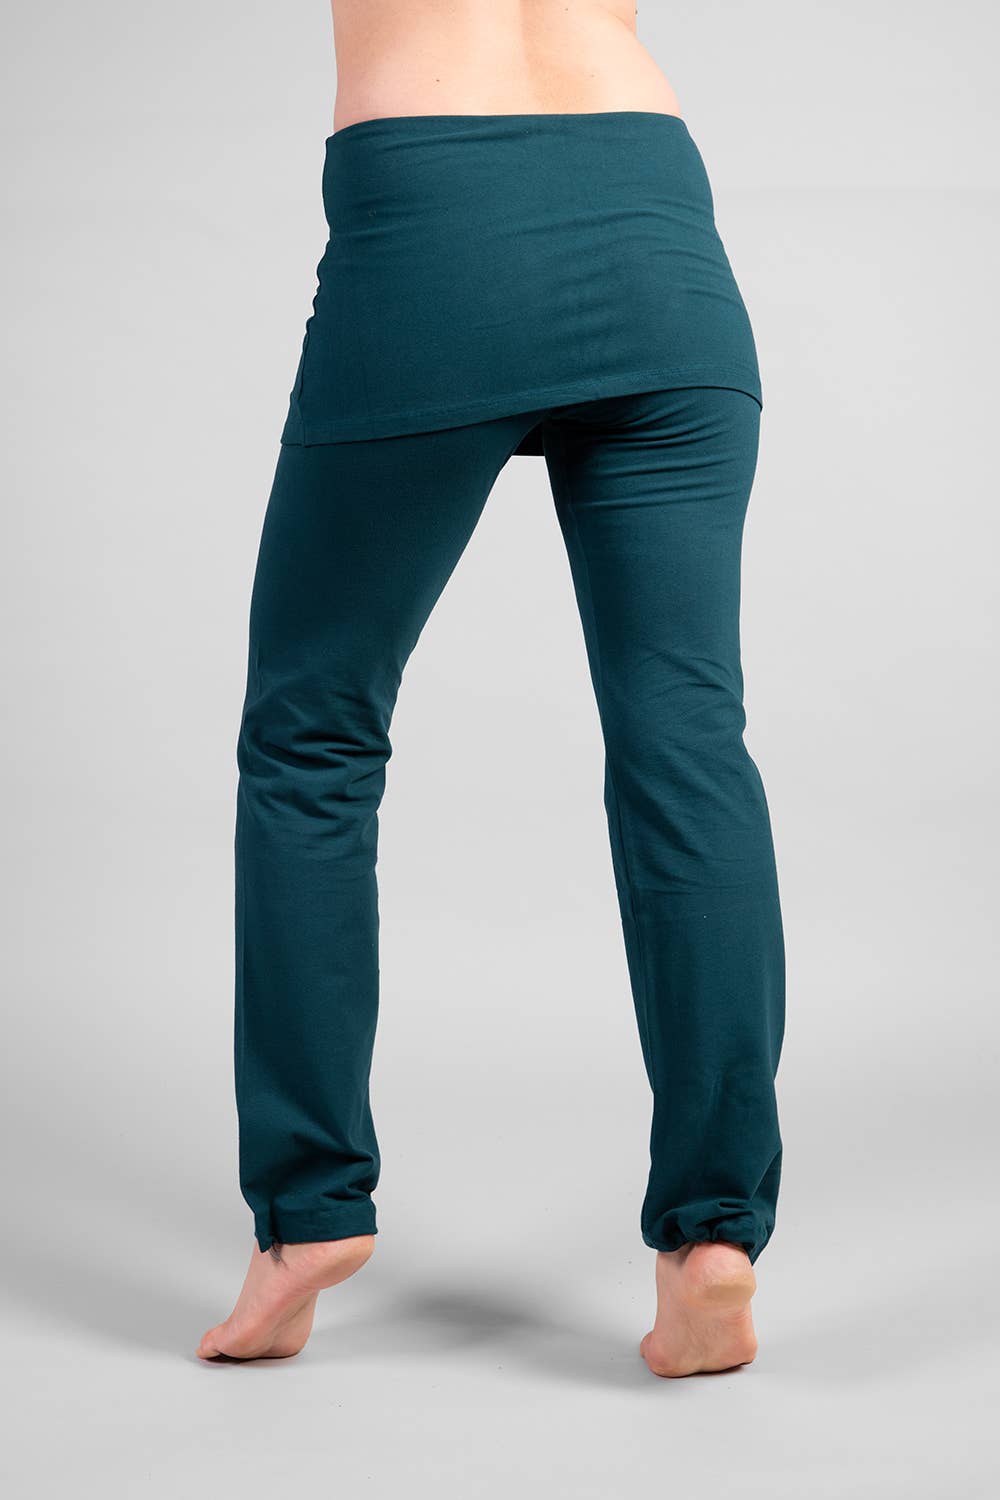 Womens Yoga Pants in Nabha - Dealers, Manufacturers & Suppliers